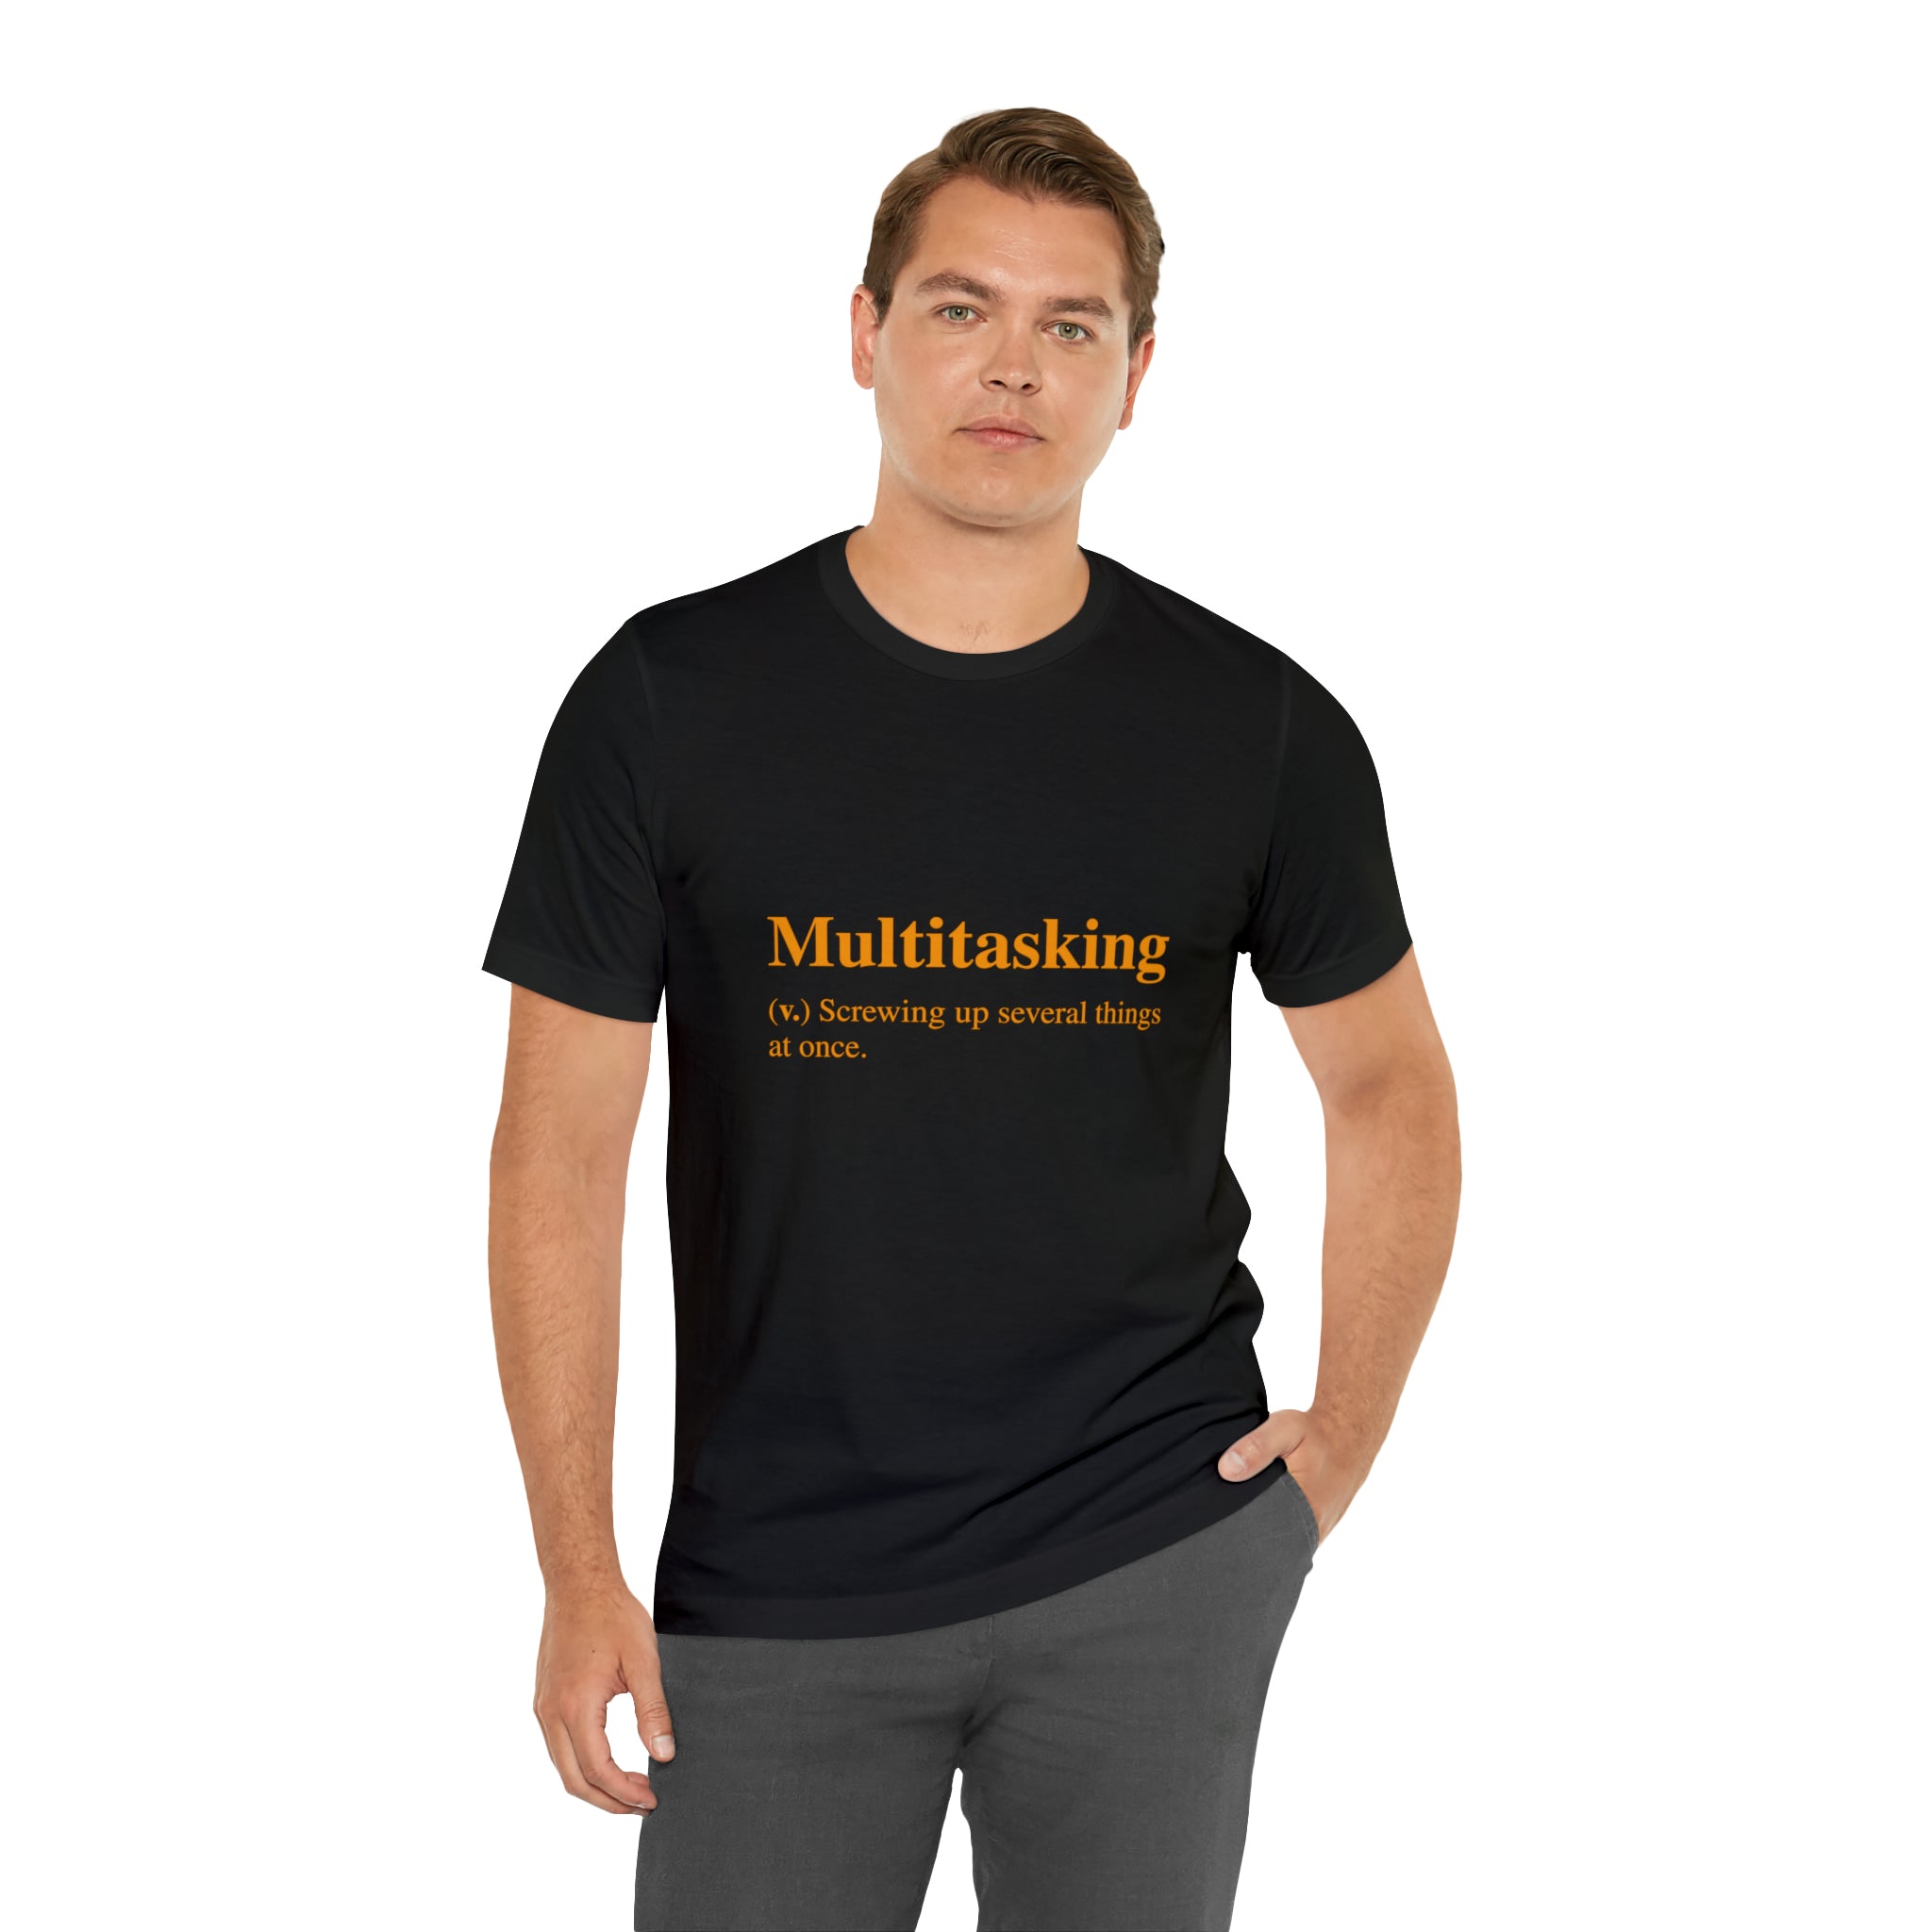 A fashionable man confidently wears a Multitasking T-Shirt.